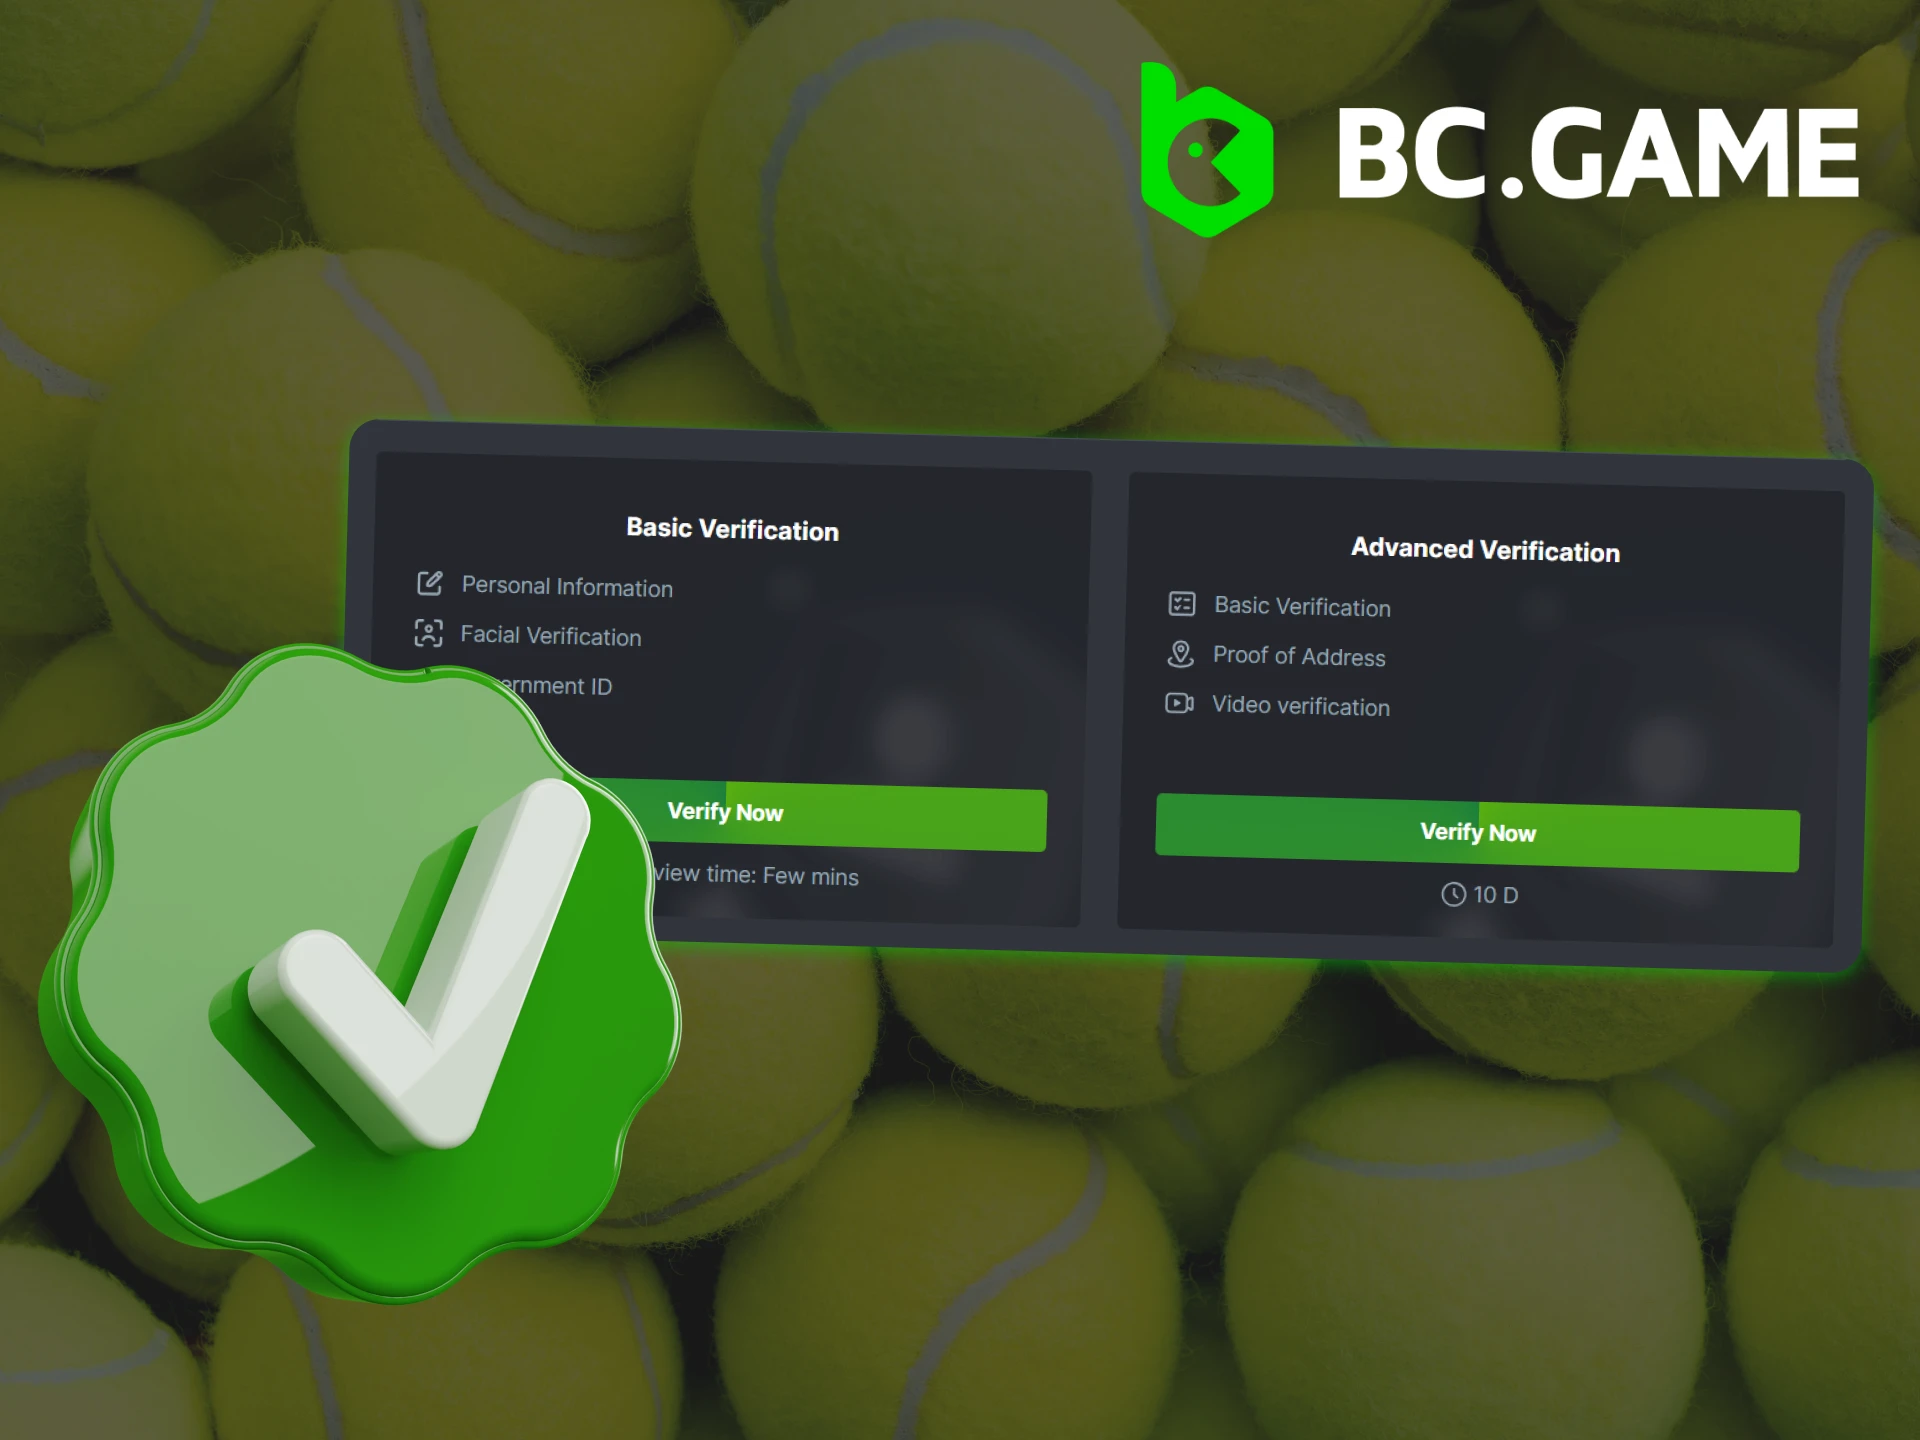 At BC Game you can complete the basic or advanced verification process.